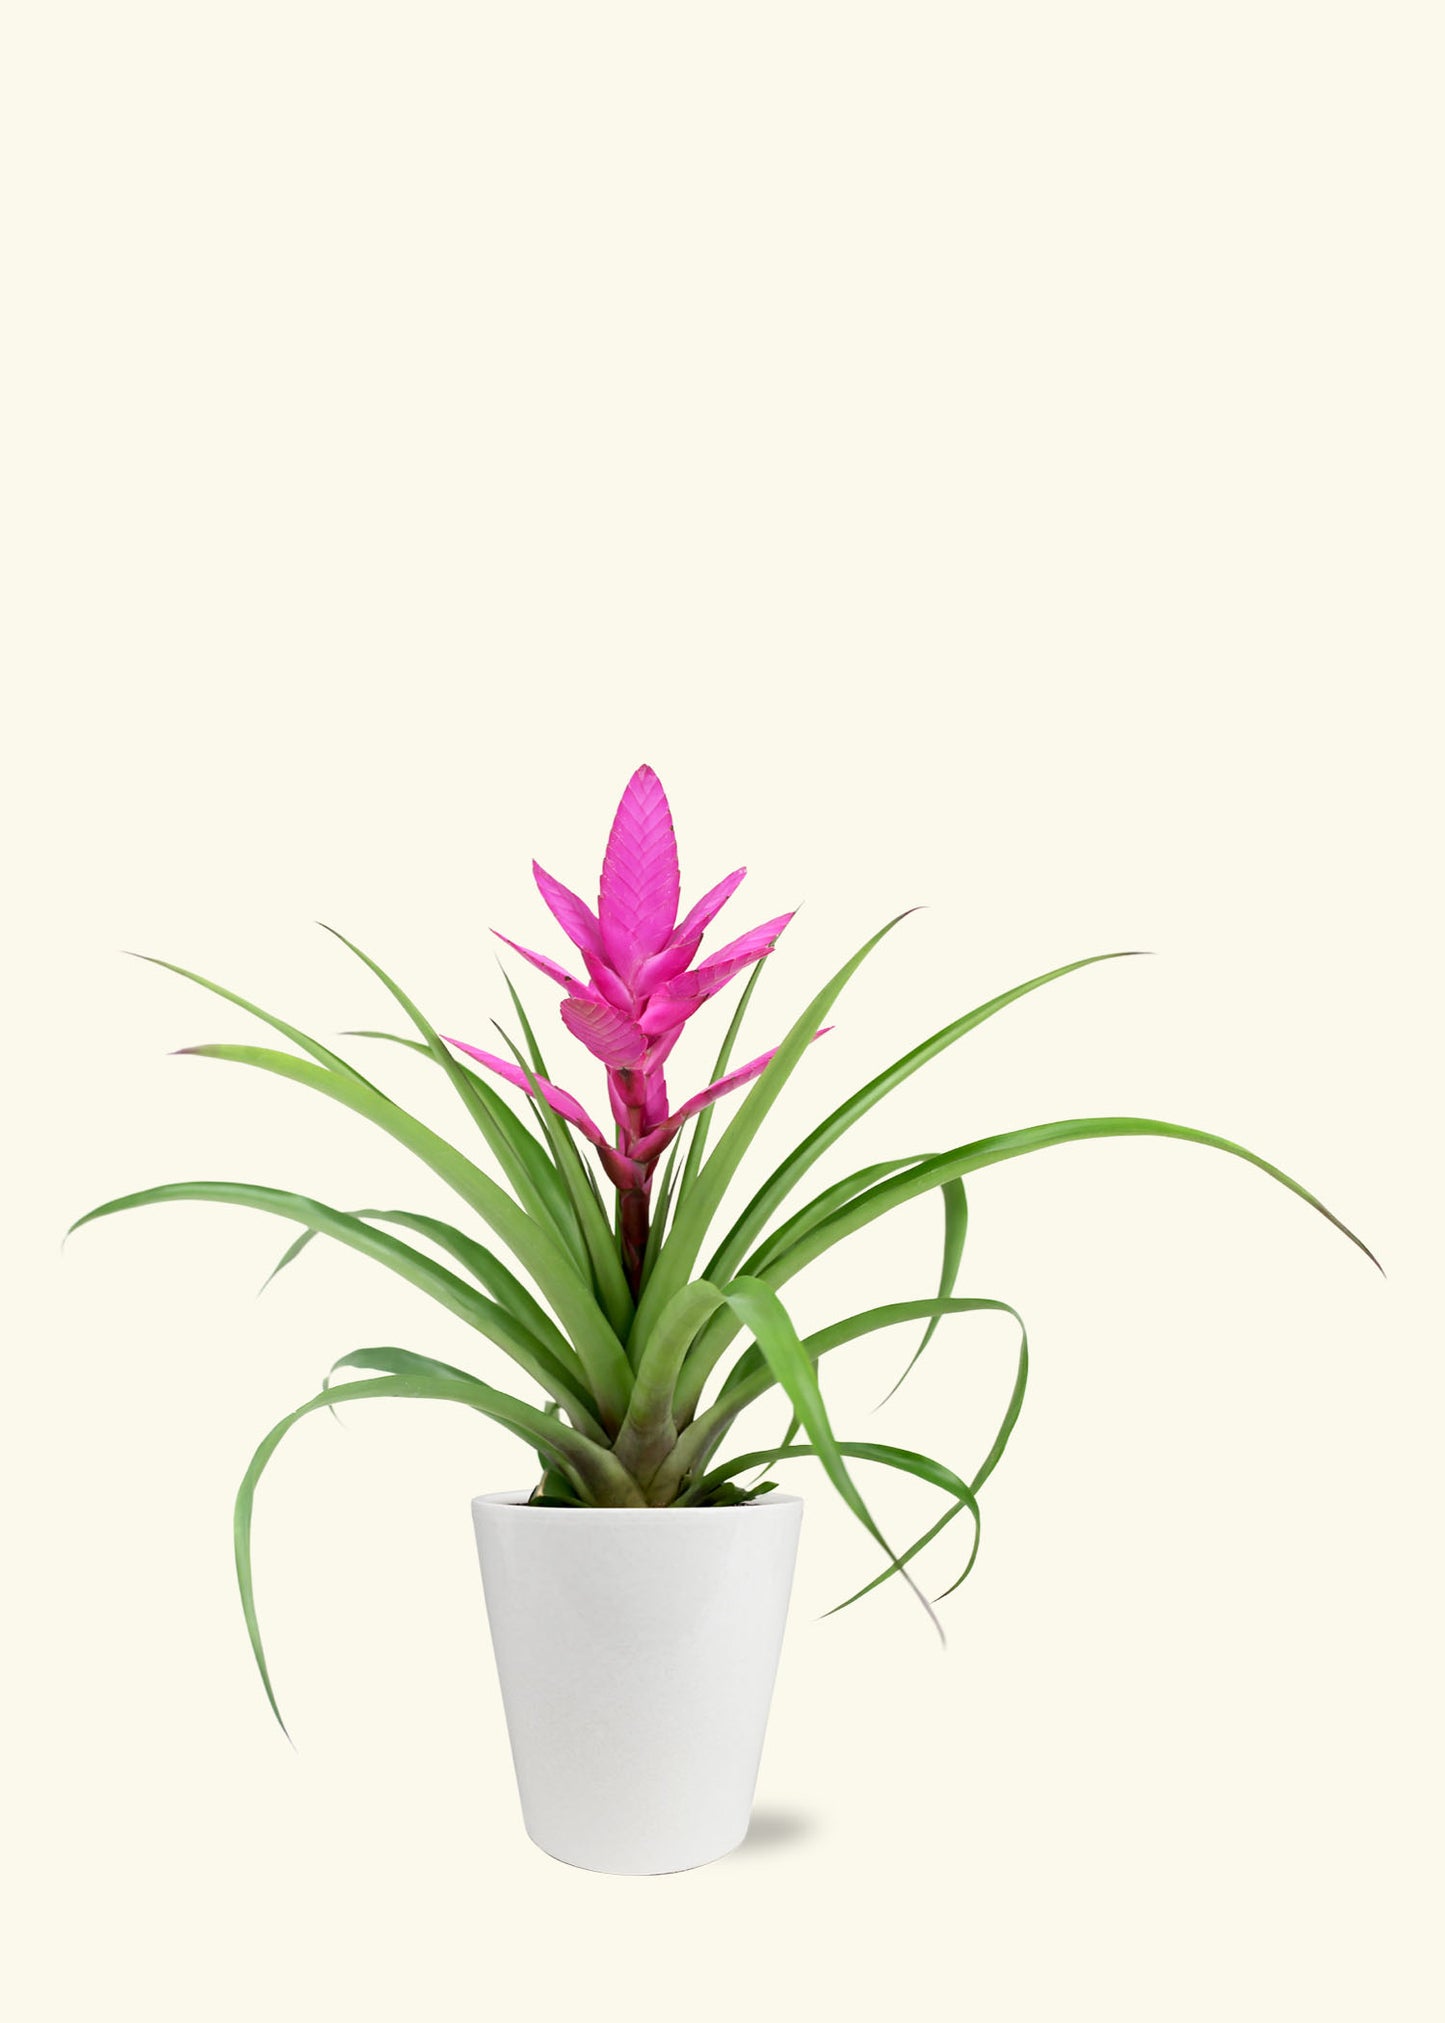 Small Pink Bromeliad in a white quinn ceramic grow pot.